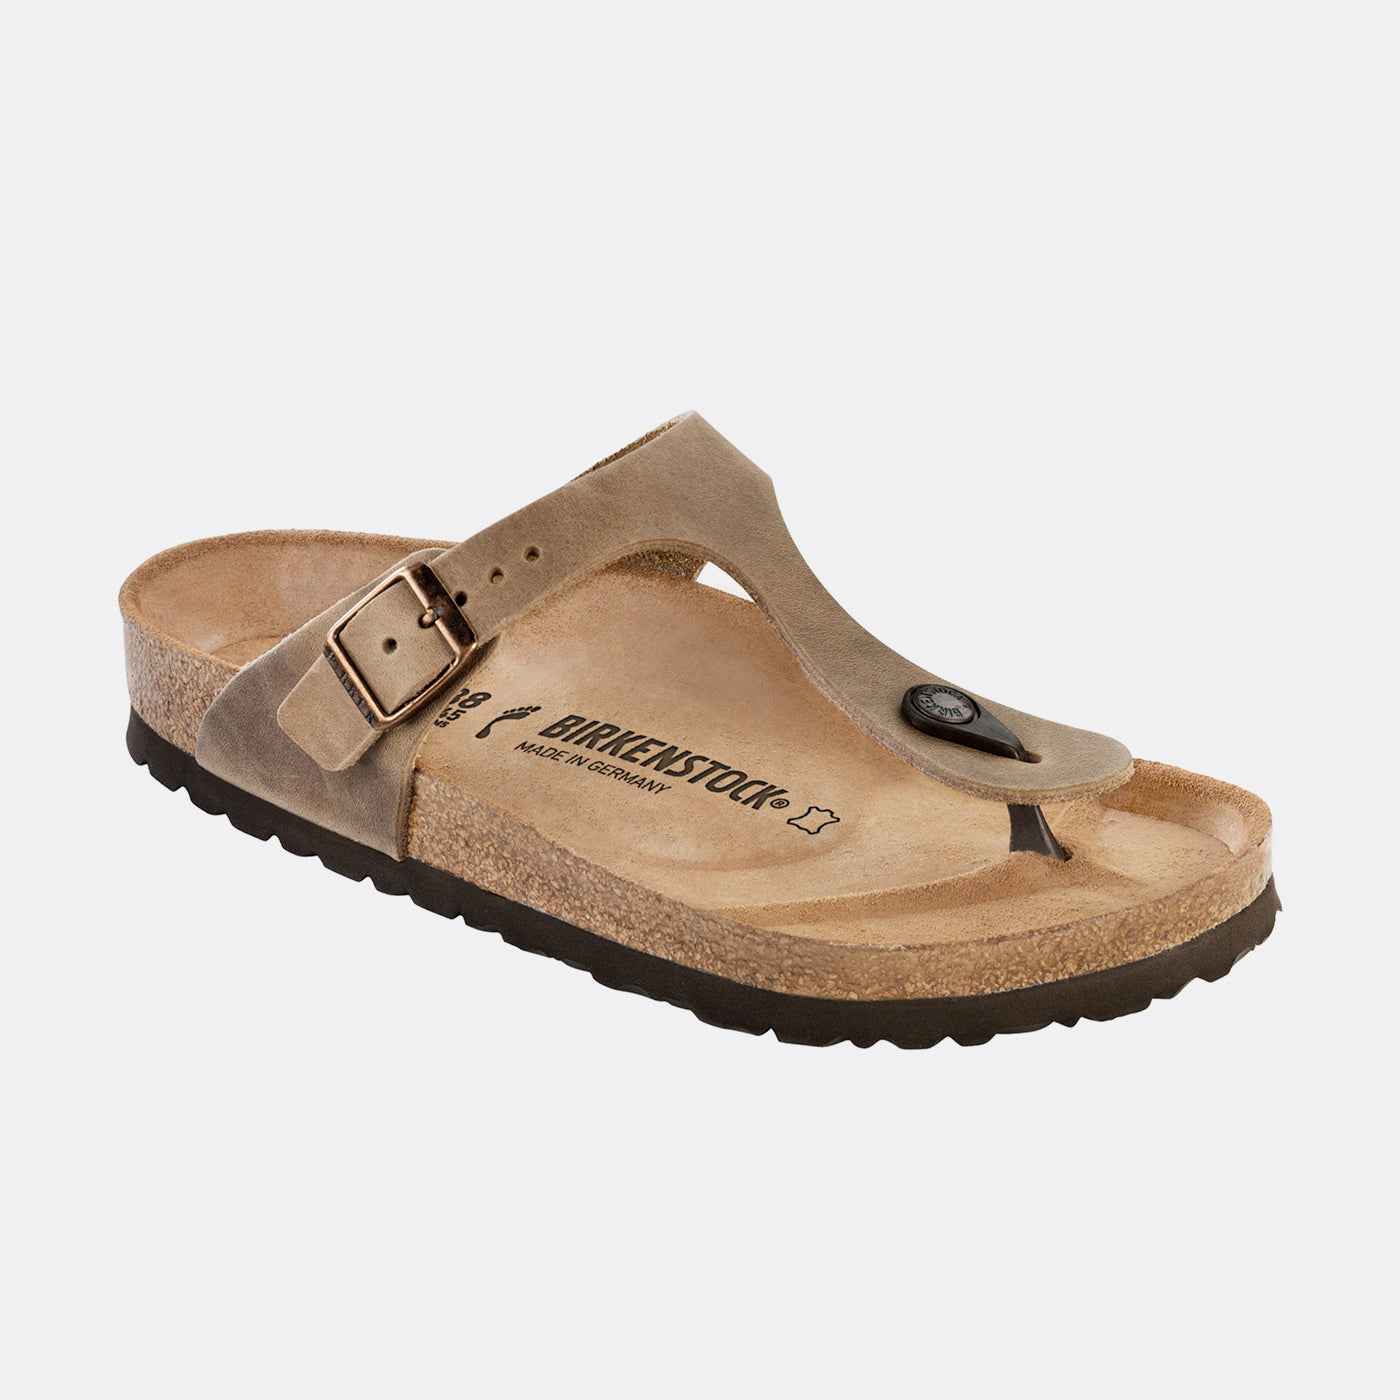 Birkenstock - Gizeh - Oiled Leather - Tabacco Brown - Regular